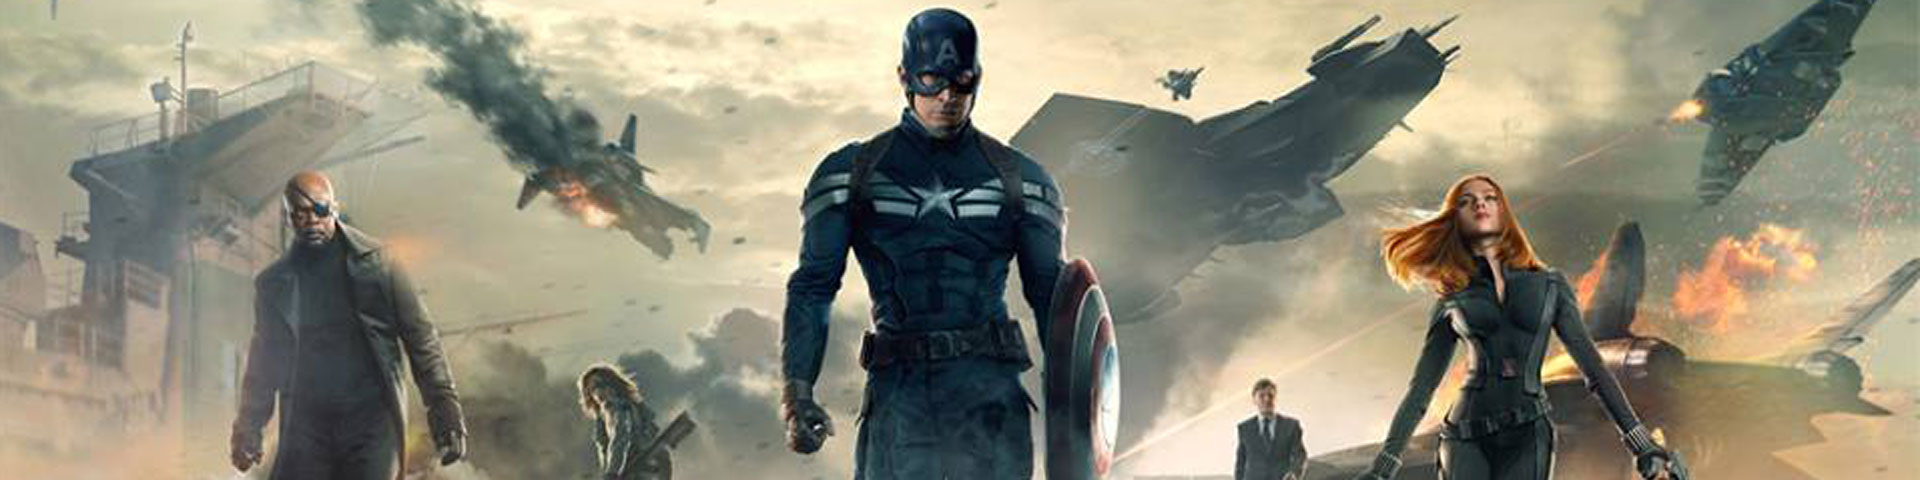 Captain America, in a dark blue uniform, is in the center of the photo while Nick Fury appears to the left and Black Widow to the right.